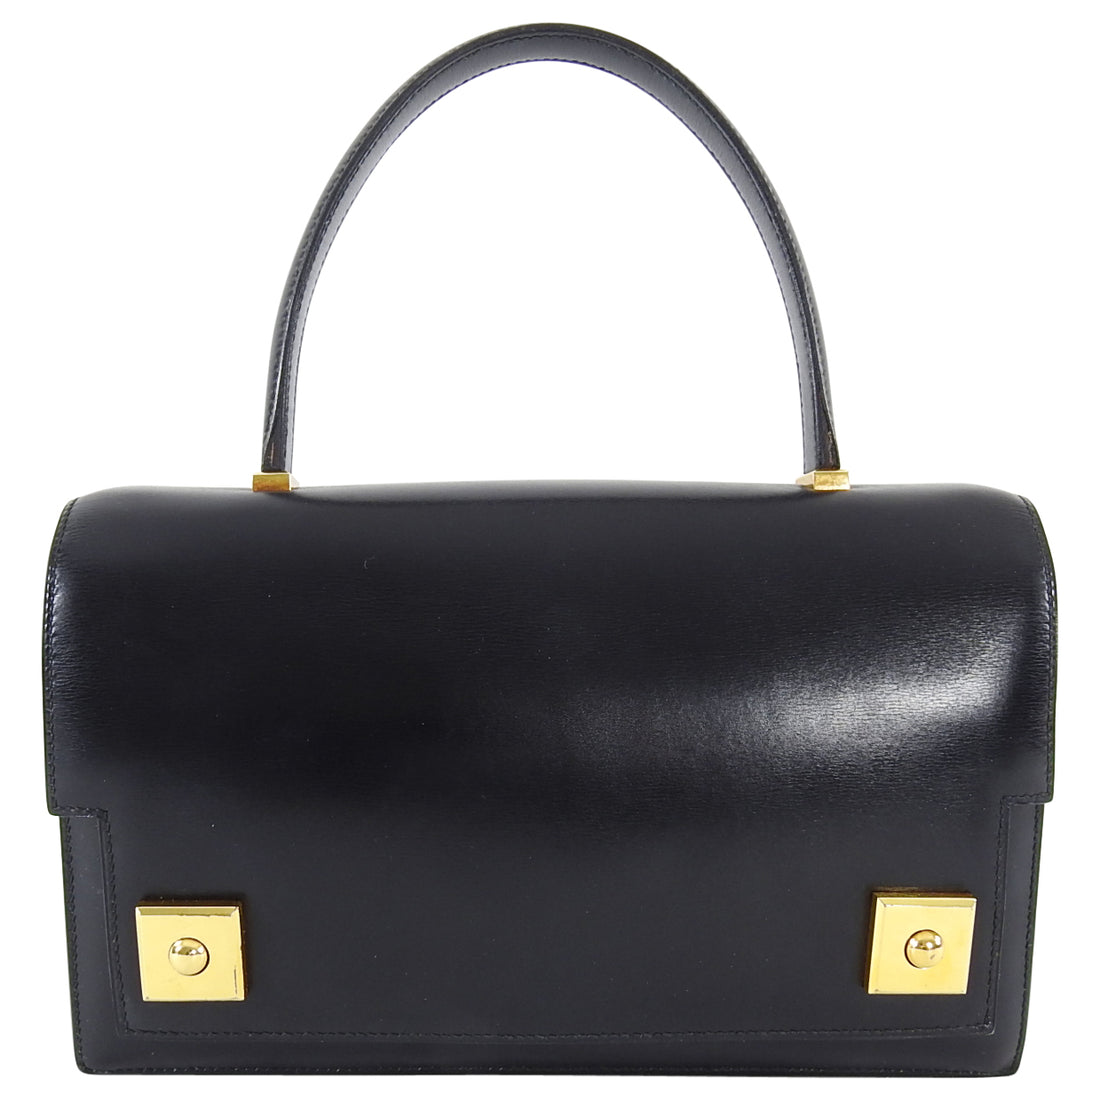 Hermes Vintage 1973 Piano Bag in Black Box Calf Leather 